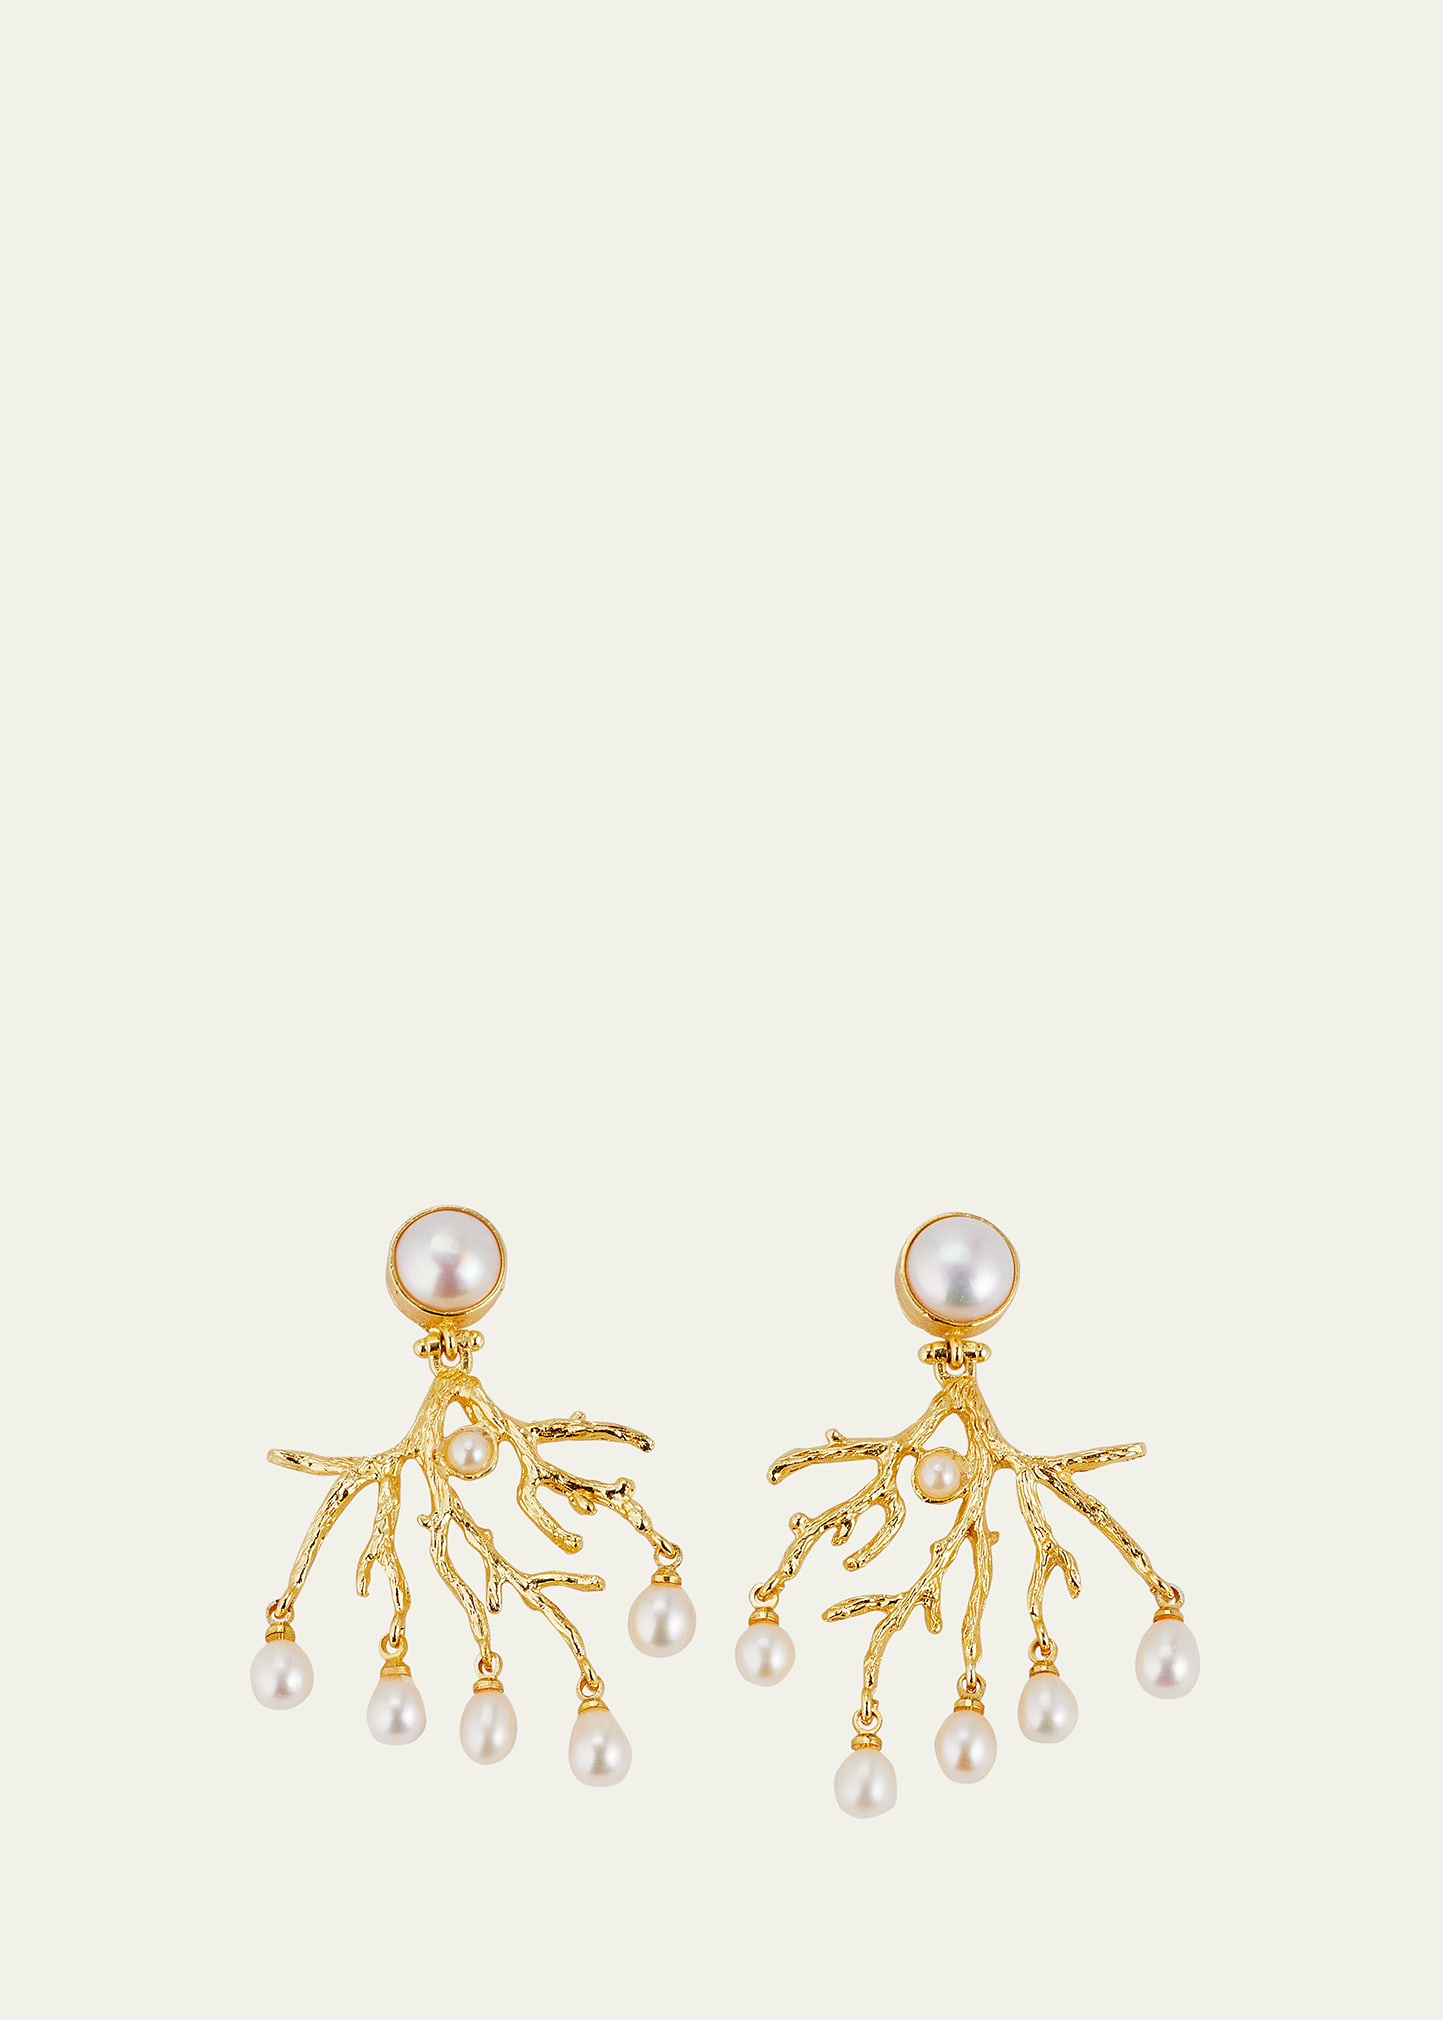 V.bellan Claire Earrings With Pearls In 18k Yg Plated Bra